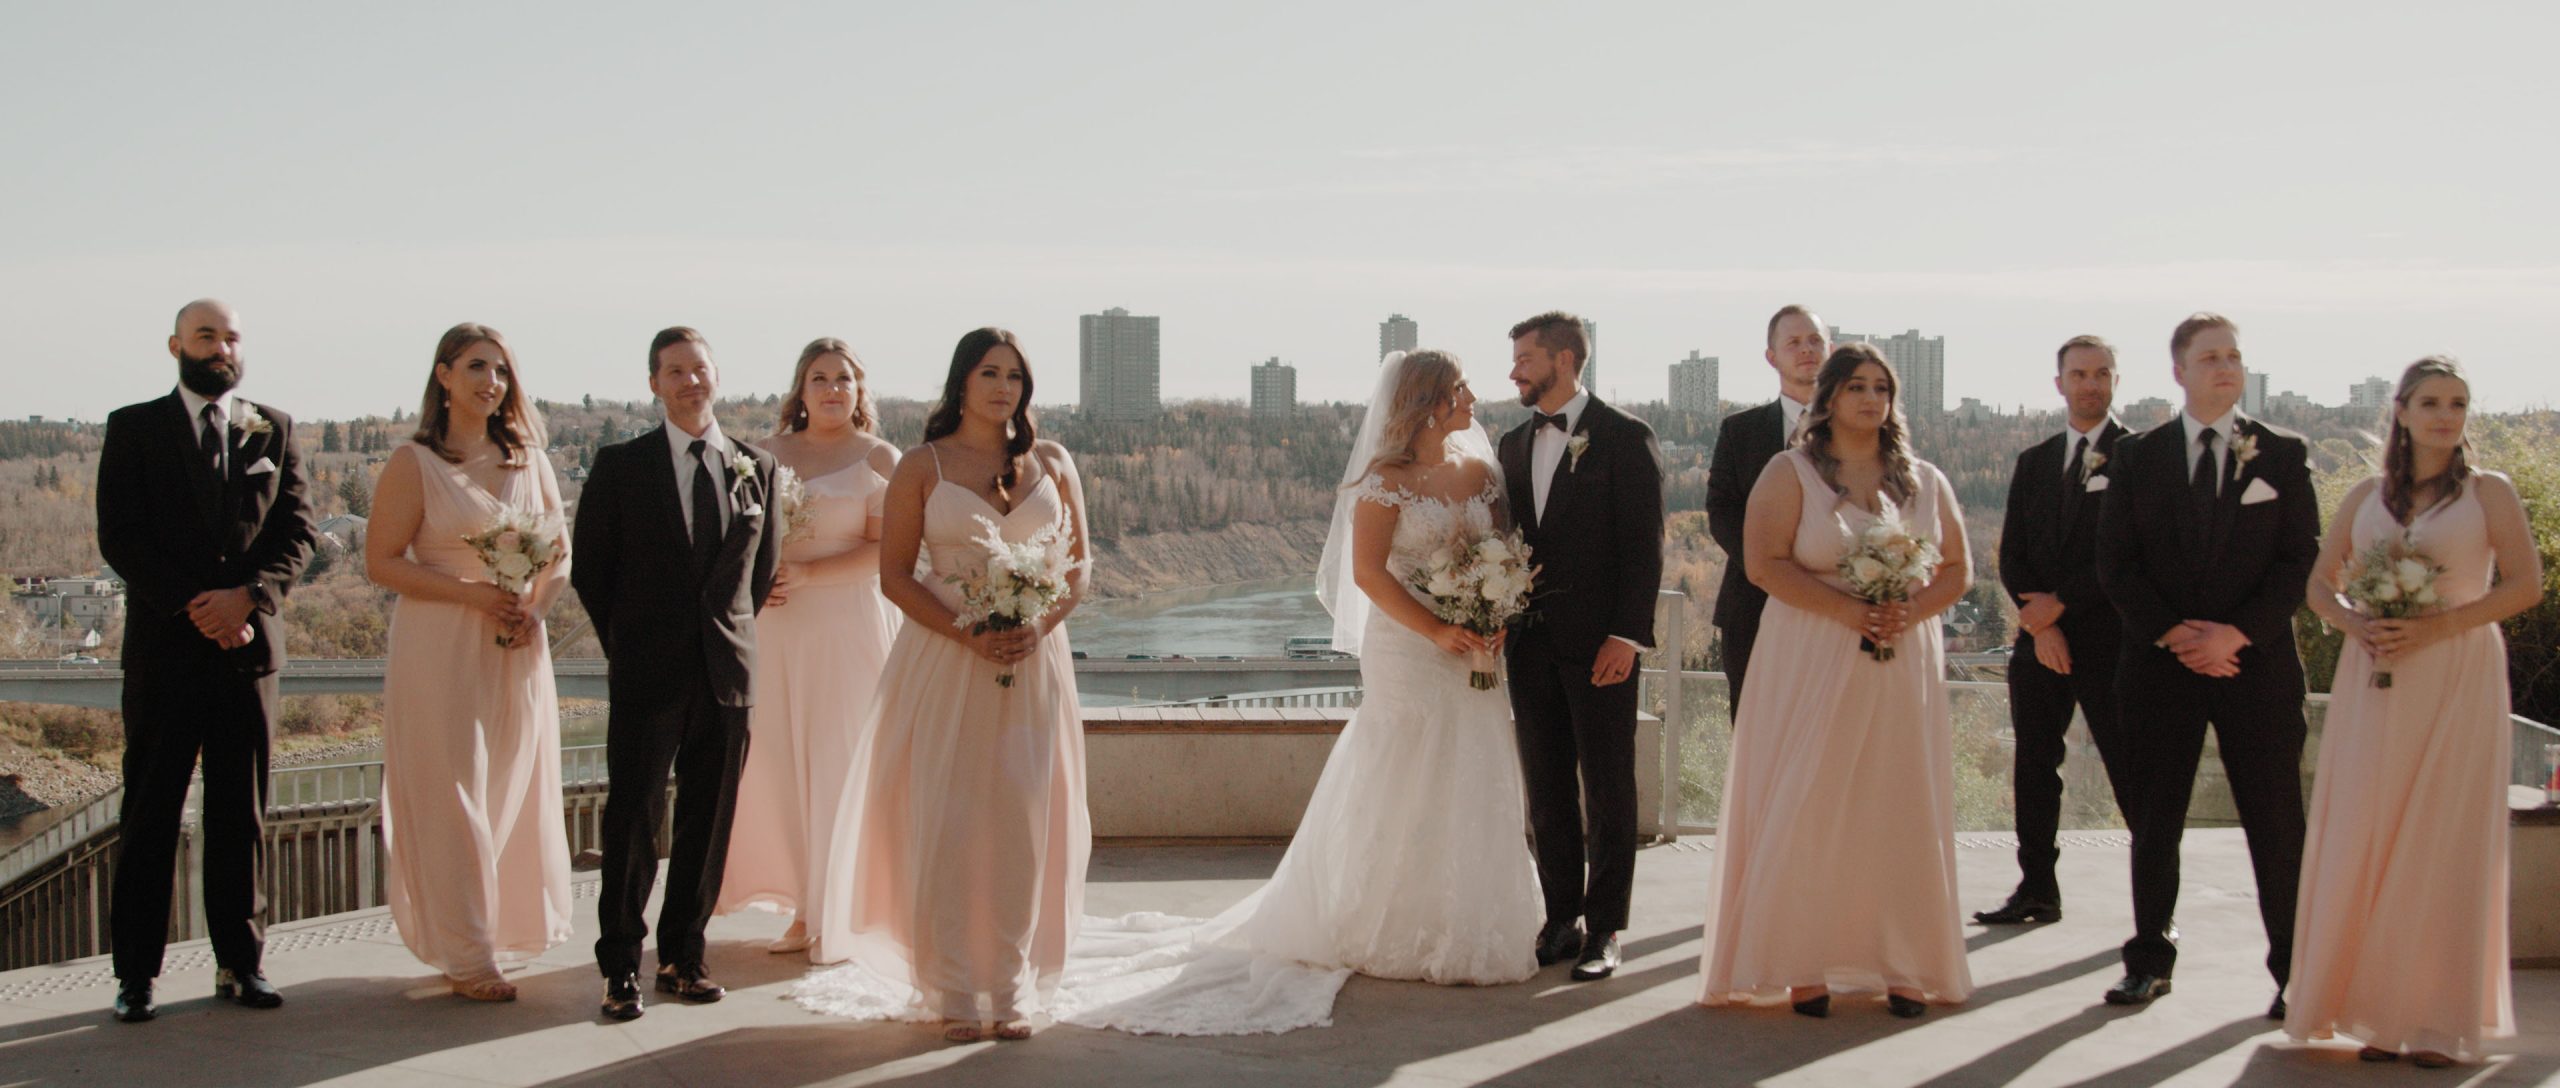 Bridal Party posing in front of river valley in the fall